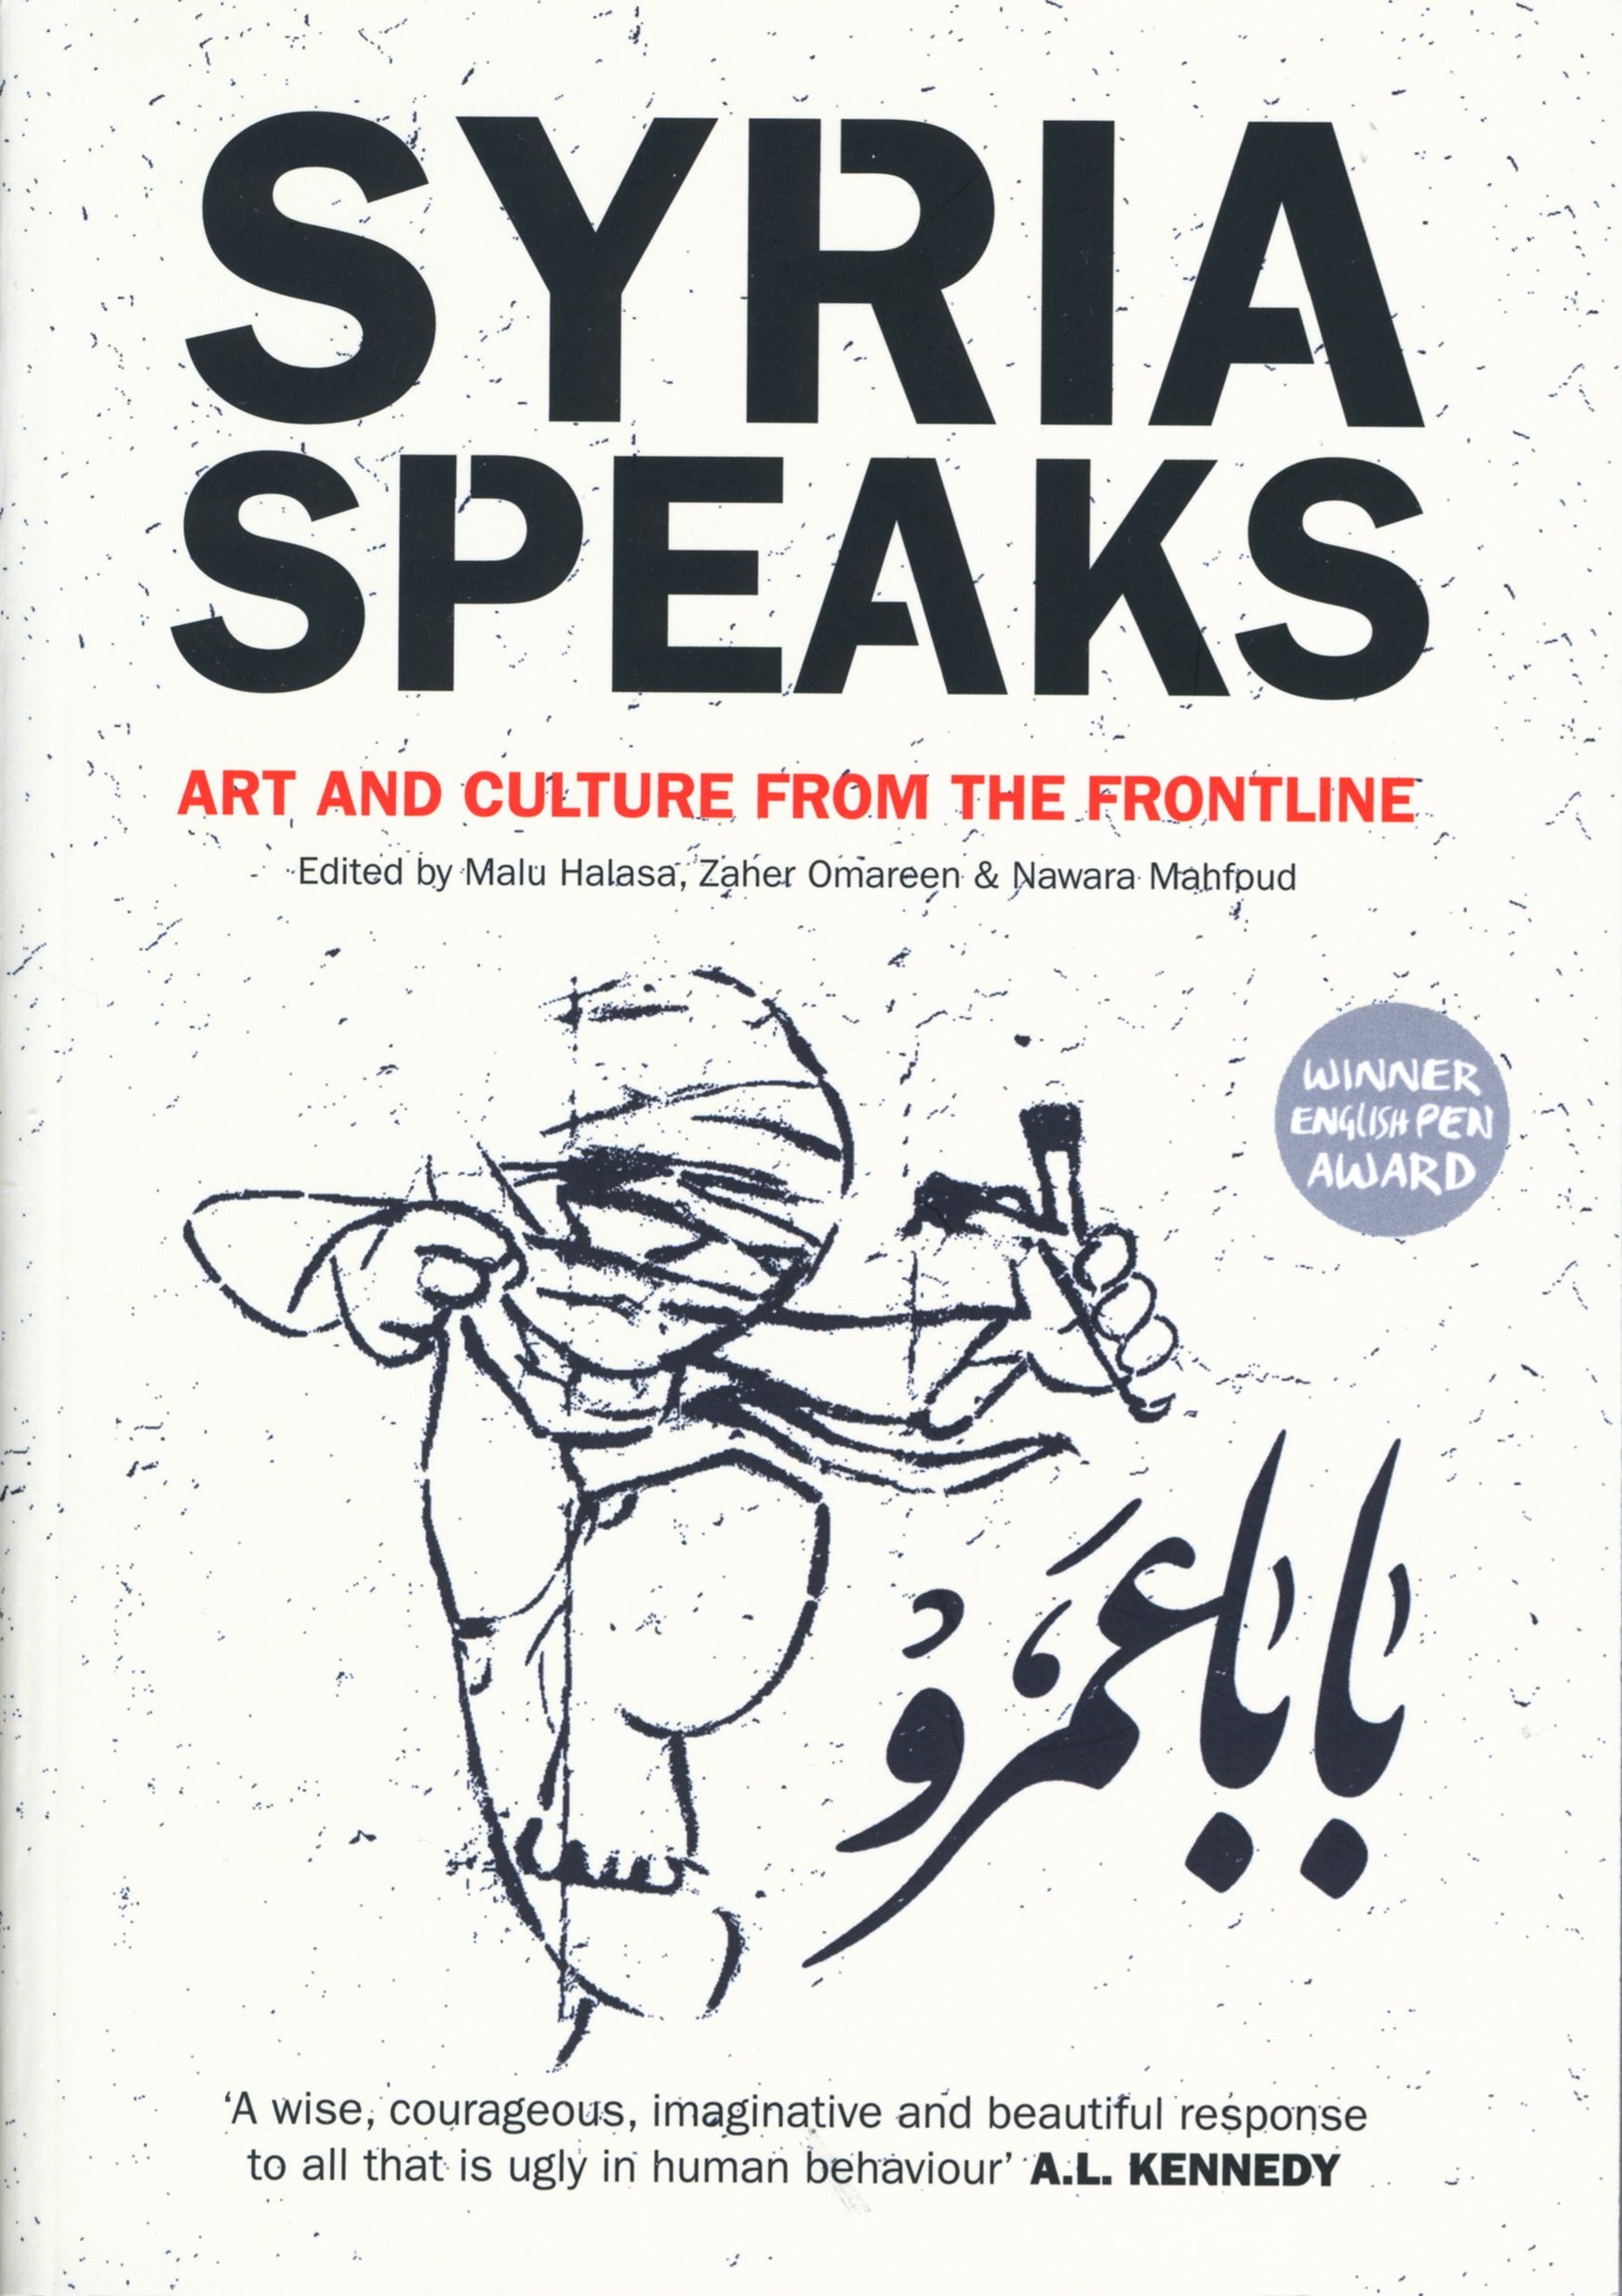 Cover of "Syria Speaks: Arts and Culture from the Frontline" (source: Saqi)